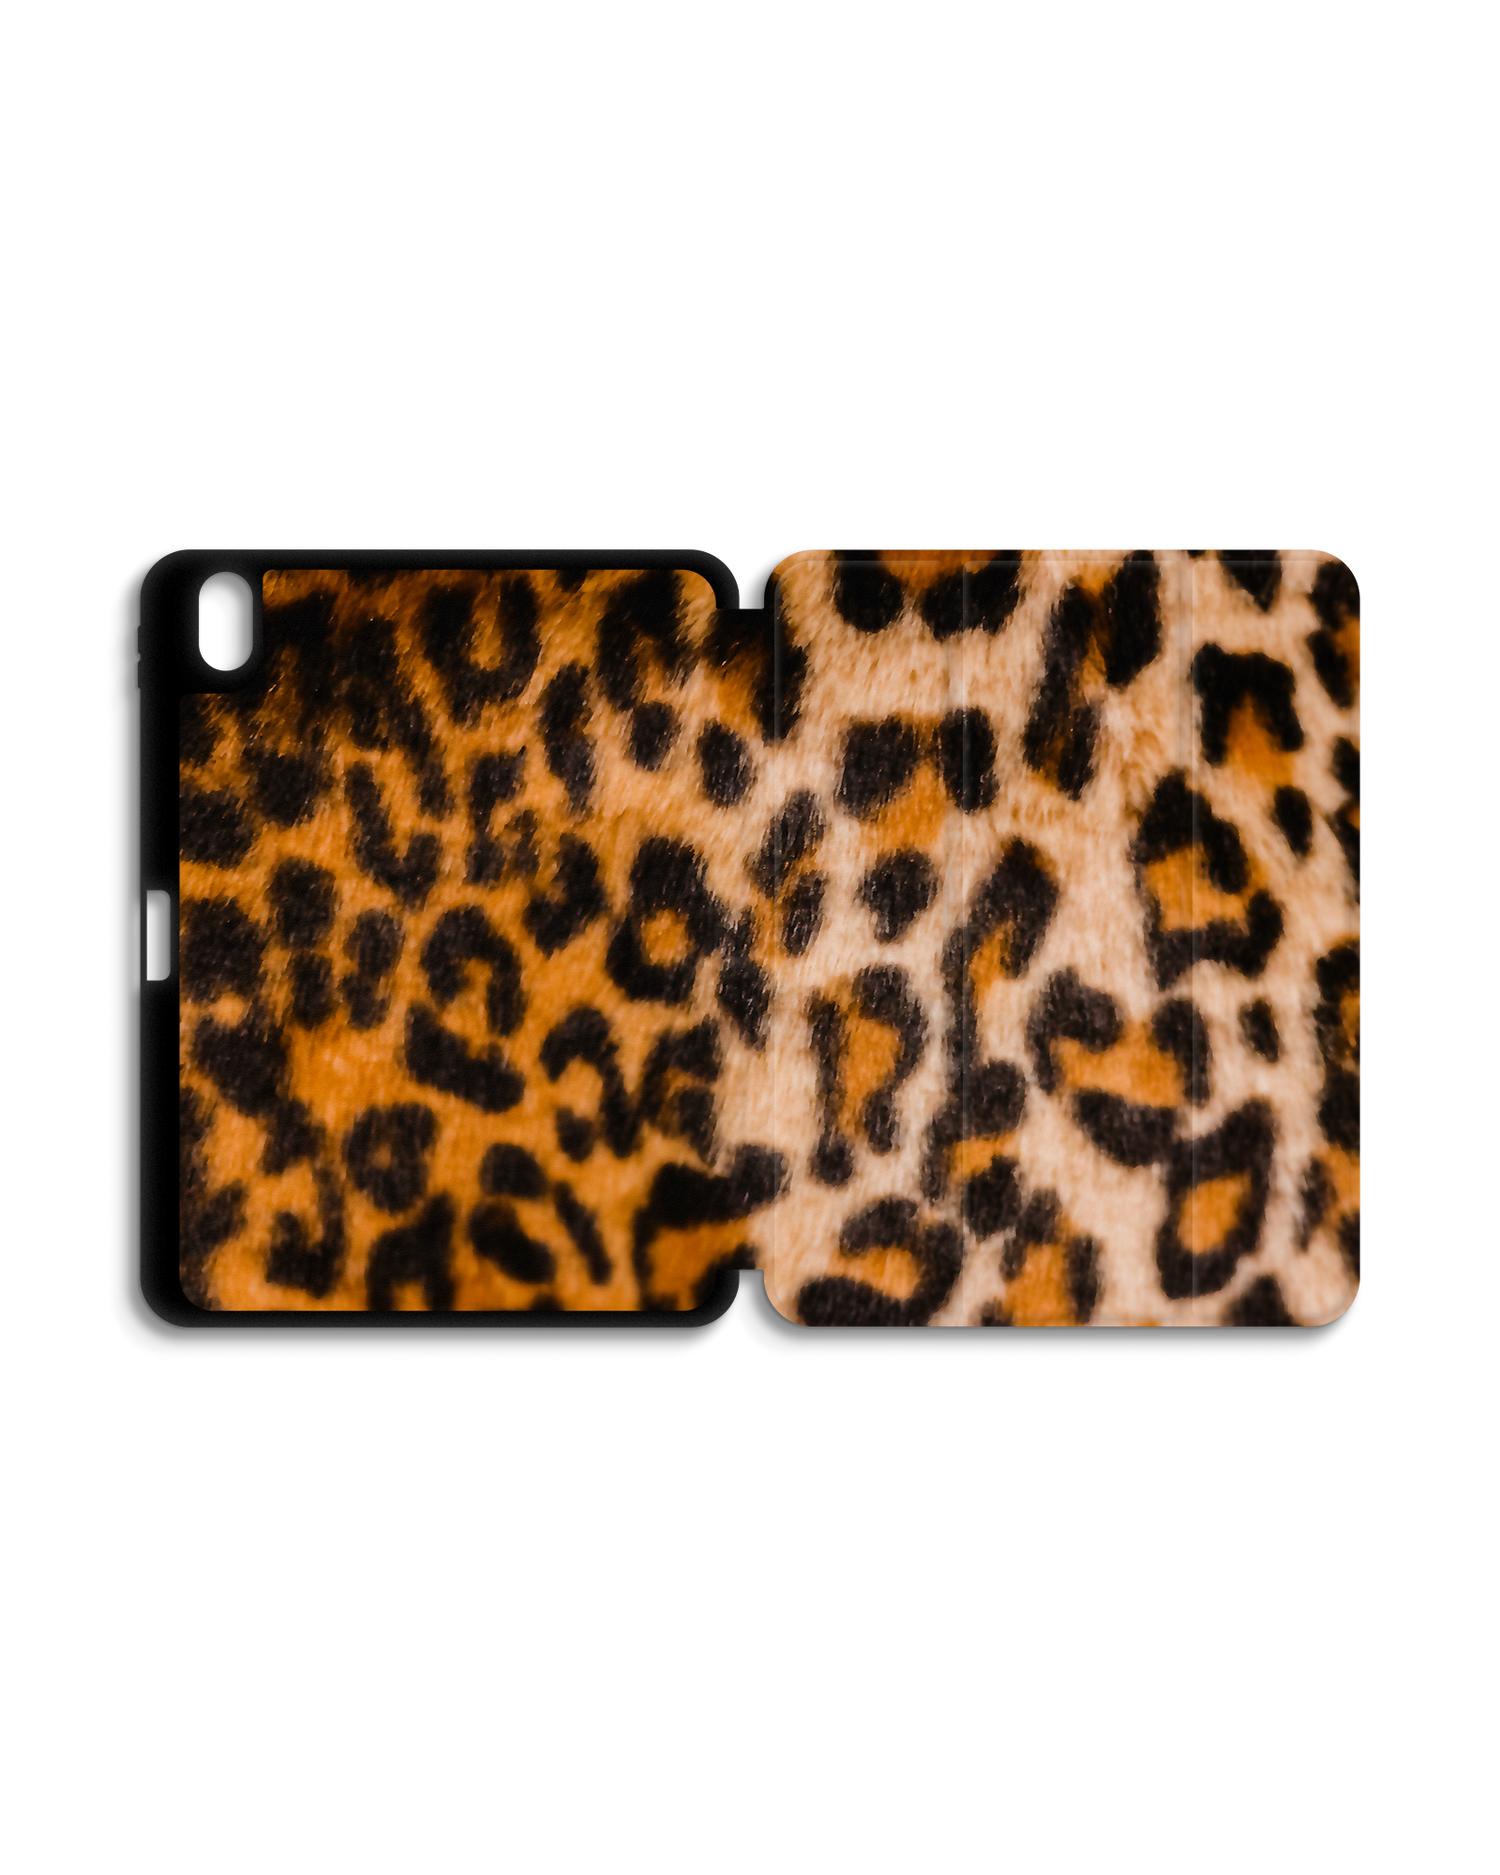 Leopard Pattern iPad Case with Pencil Holder for Apple iPad (10th Generation): Opened exterior view